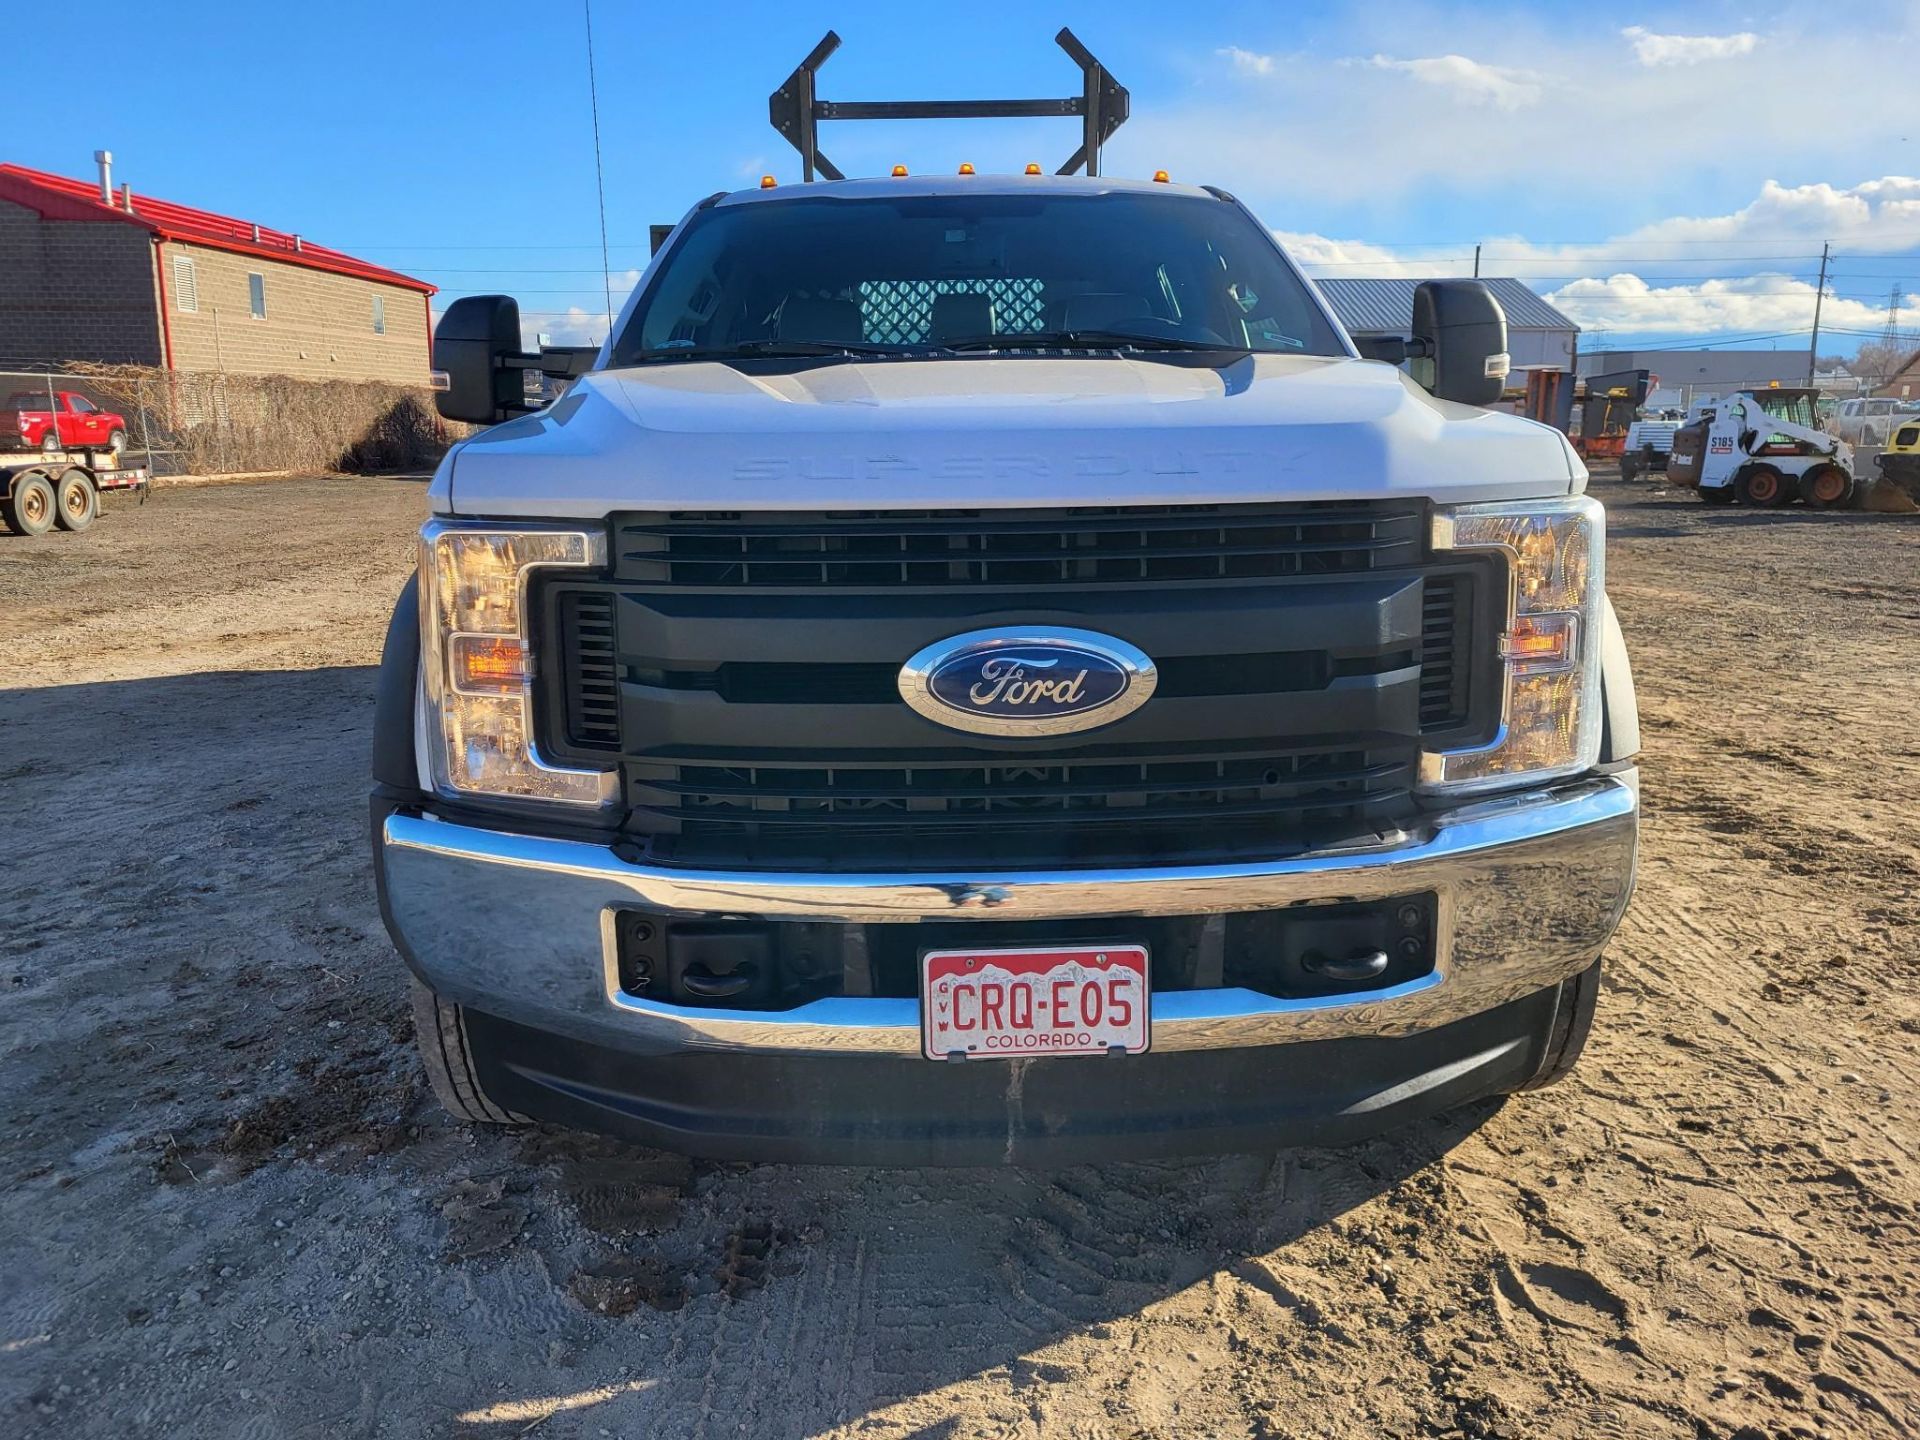 2019 FORD F550 CREW CAB DIESEL DUALLY DUMP TRUCK 31,872 MILES - Image 3 of 34